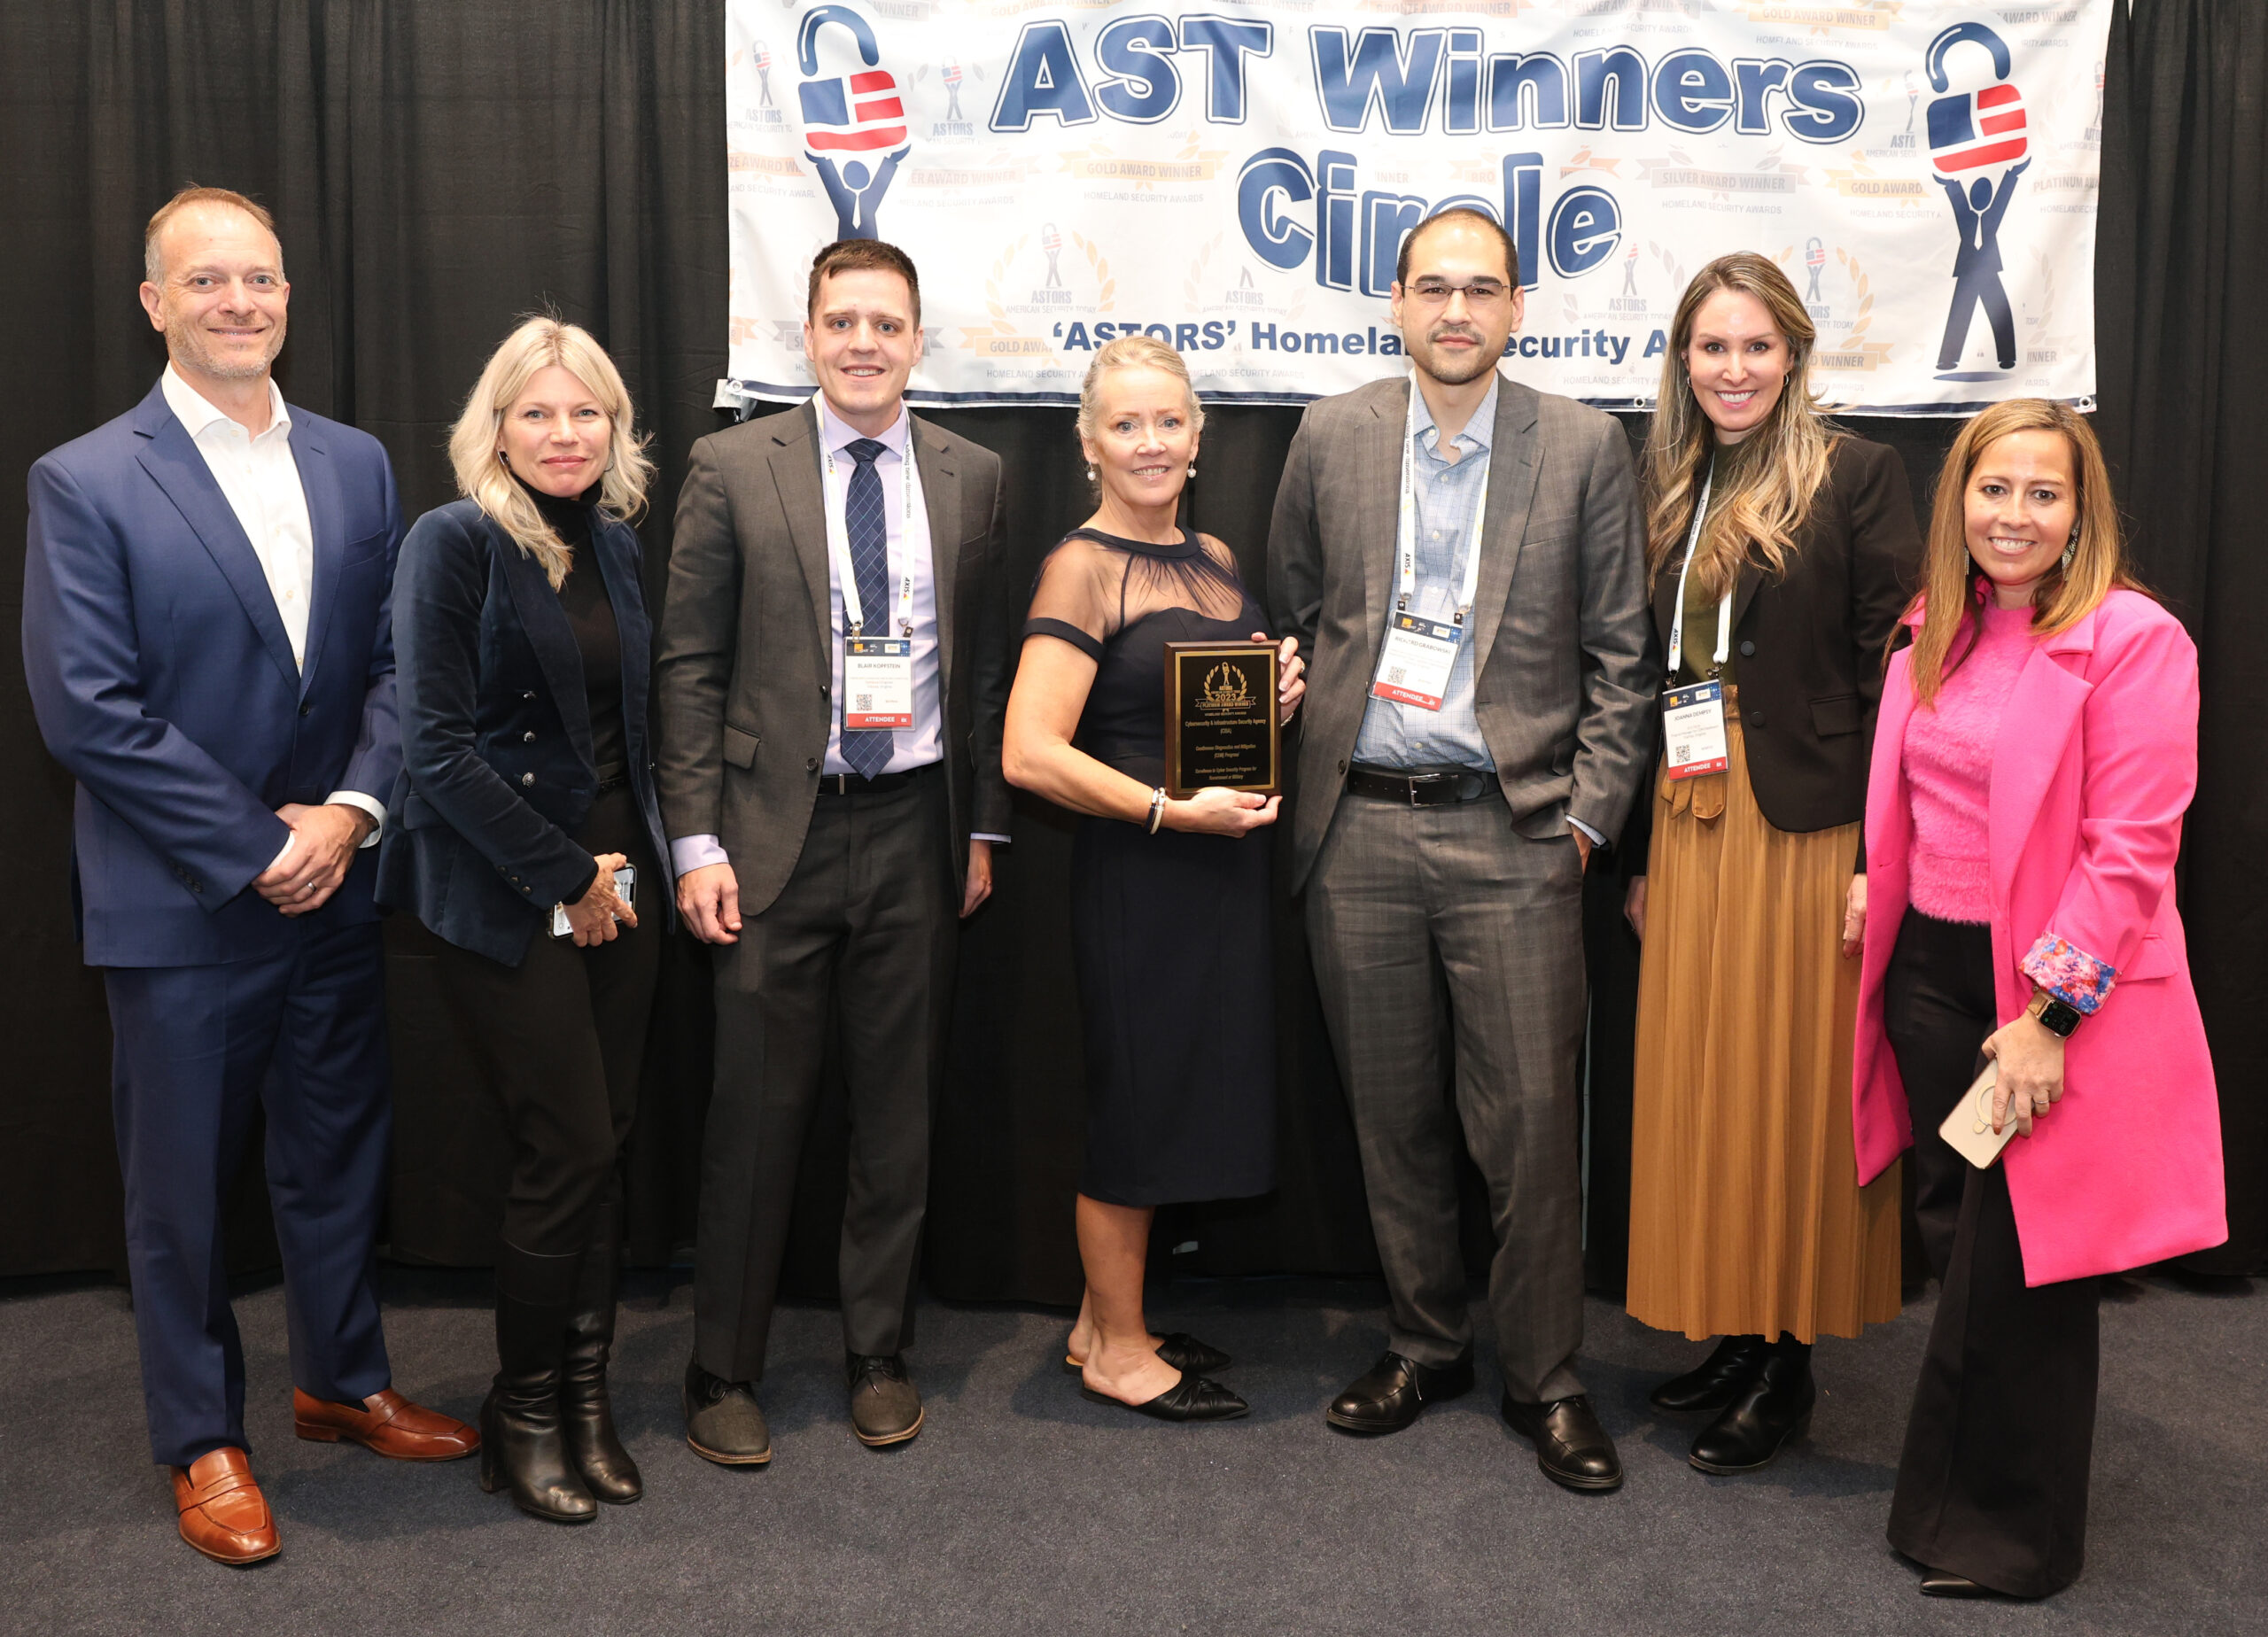 Representatives of CISAs CDM Program, including Richard Grabowski, Deputy Branch Chief, Capability Implementation and Acting Program Manager for the Continuous Diagnostics and Mitigation (CDM) Program within the Cybersecurity and Infrastructure Security Agency (CISA), Cybersecurity Division (third from right), accept one of two Excellence in Public Safety and Community Resilience awards in the 2023 ASTORS Homeland Security and Excellence in Public Safety Awards Program in New York City at ISC East.